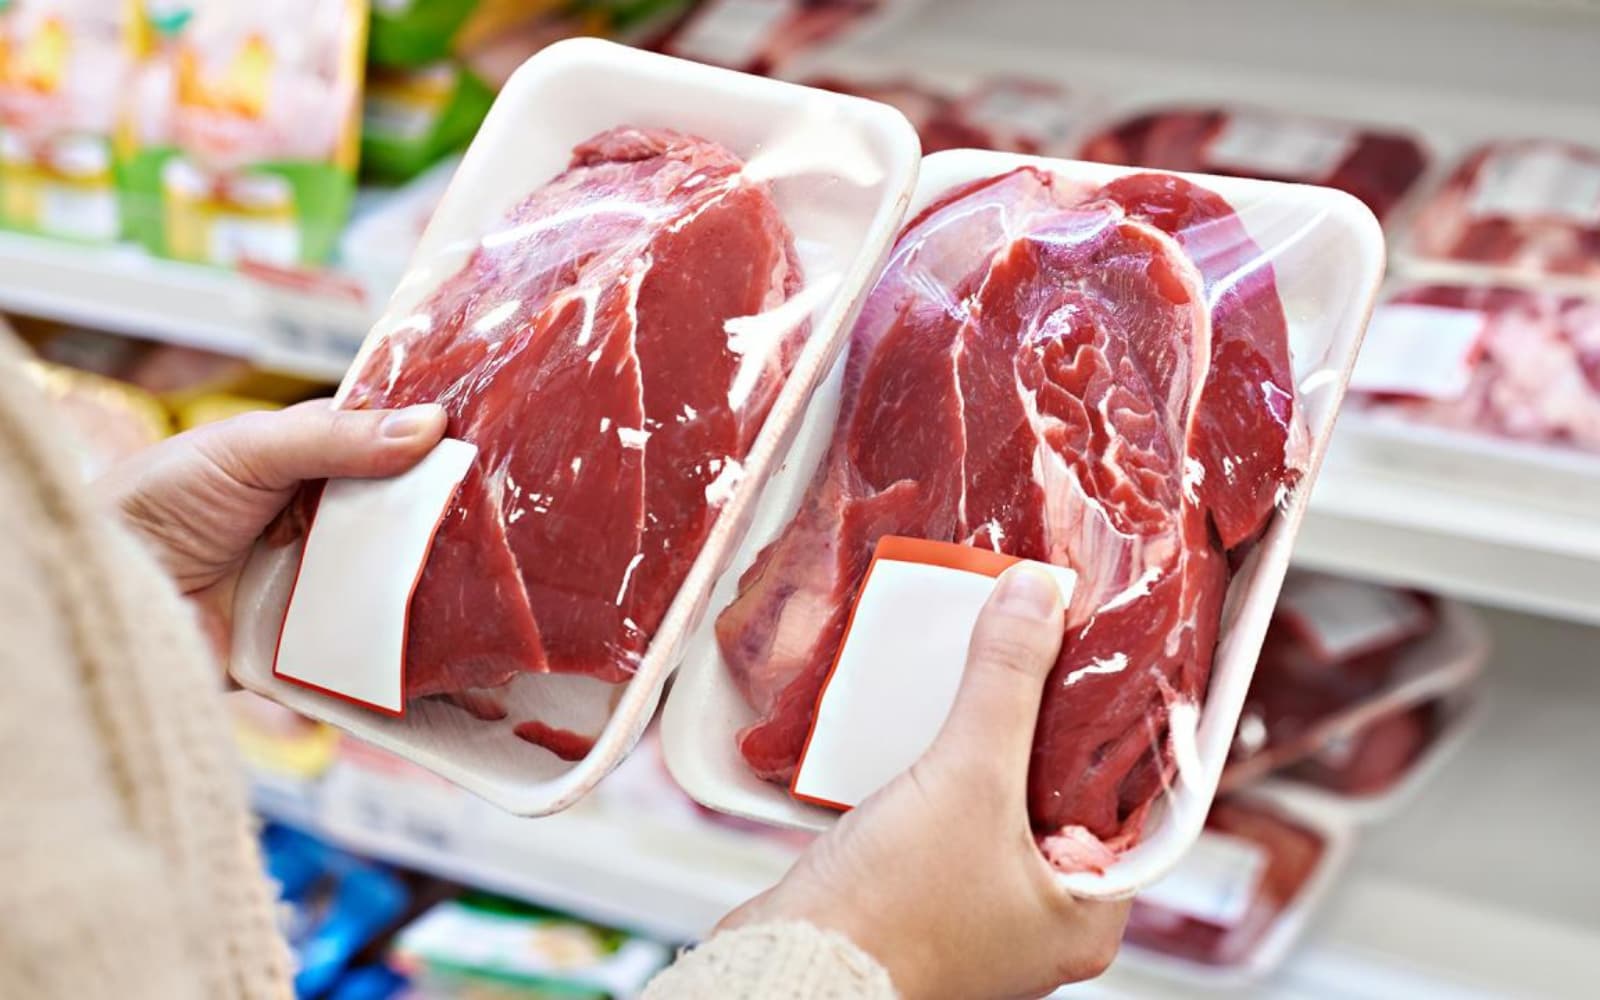 Inexpensive Cuts of Meat to Look Out for at the Supermarket